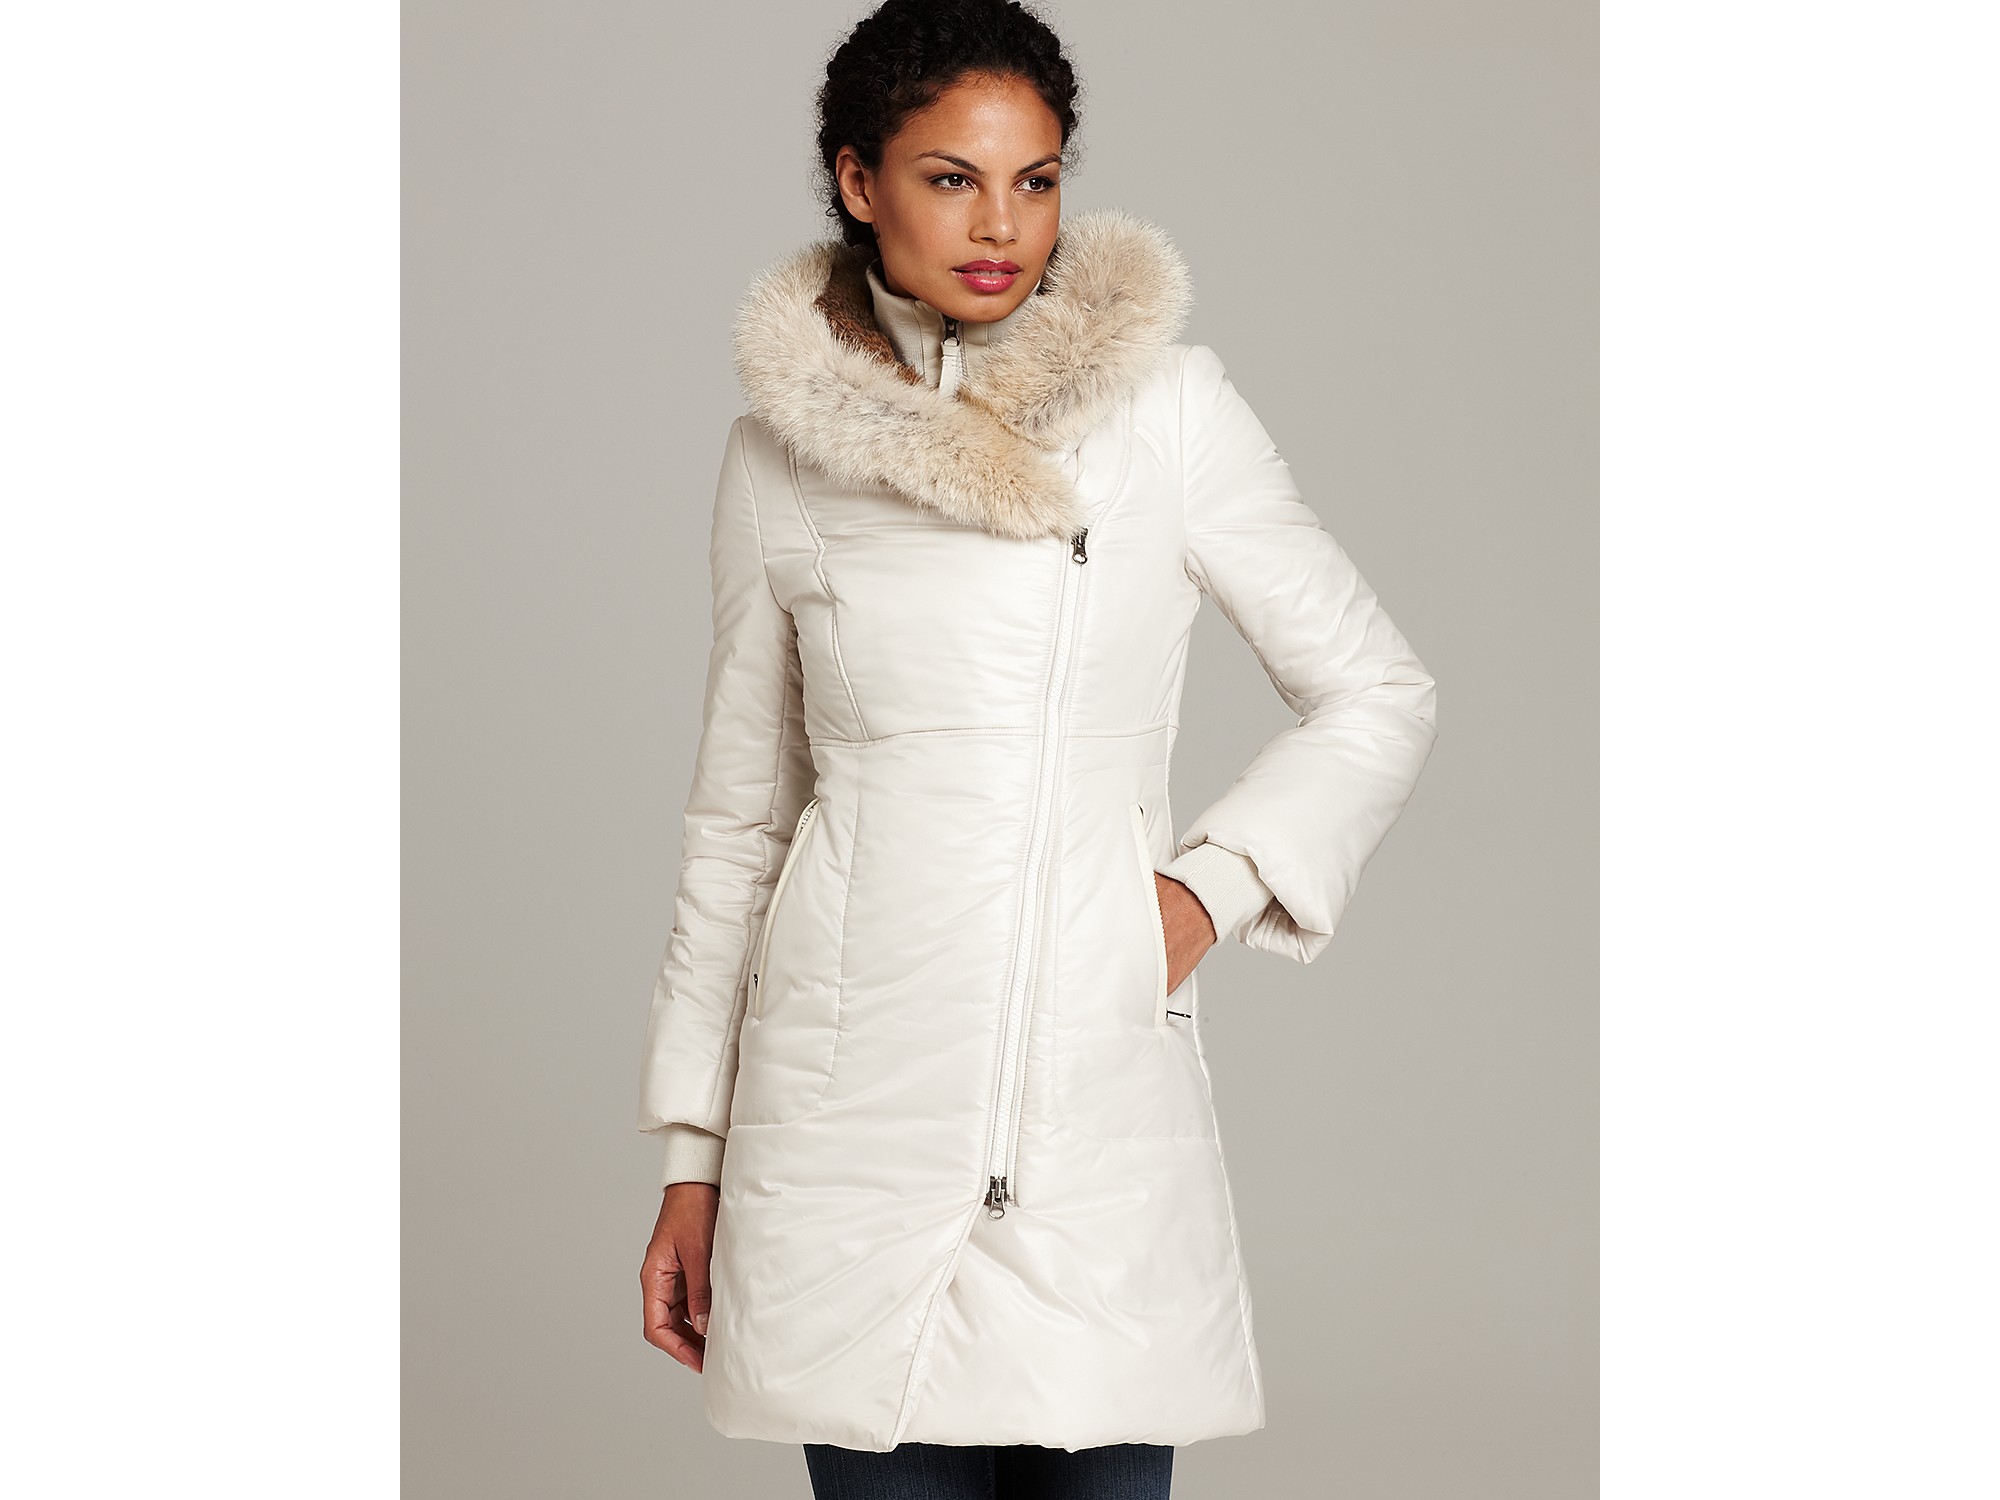 Mackage Liz C Long Puffer Jacket with Coyote Fur Trimmed Hood in White